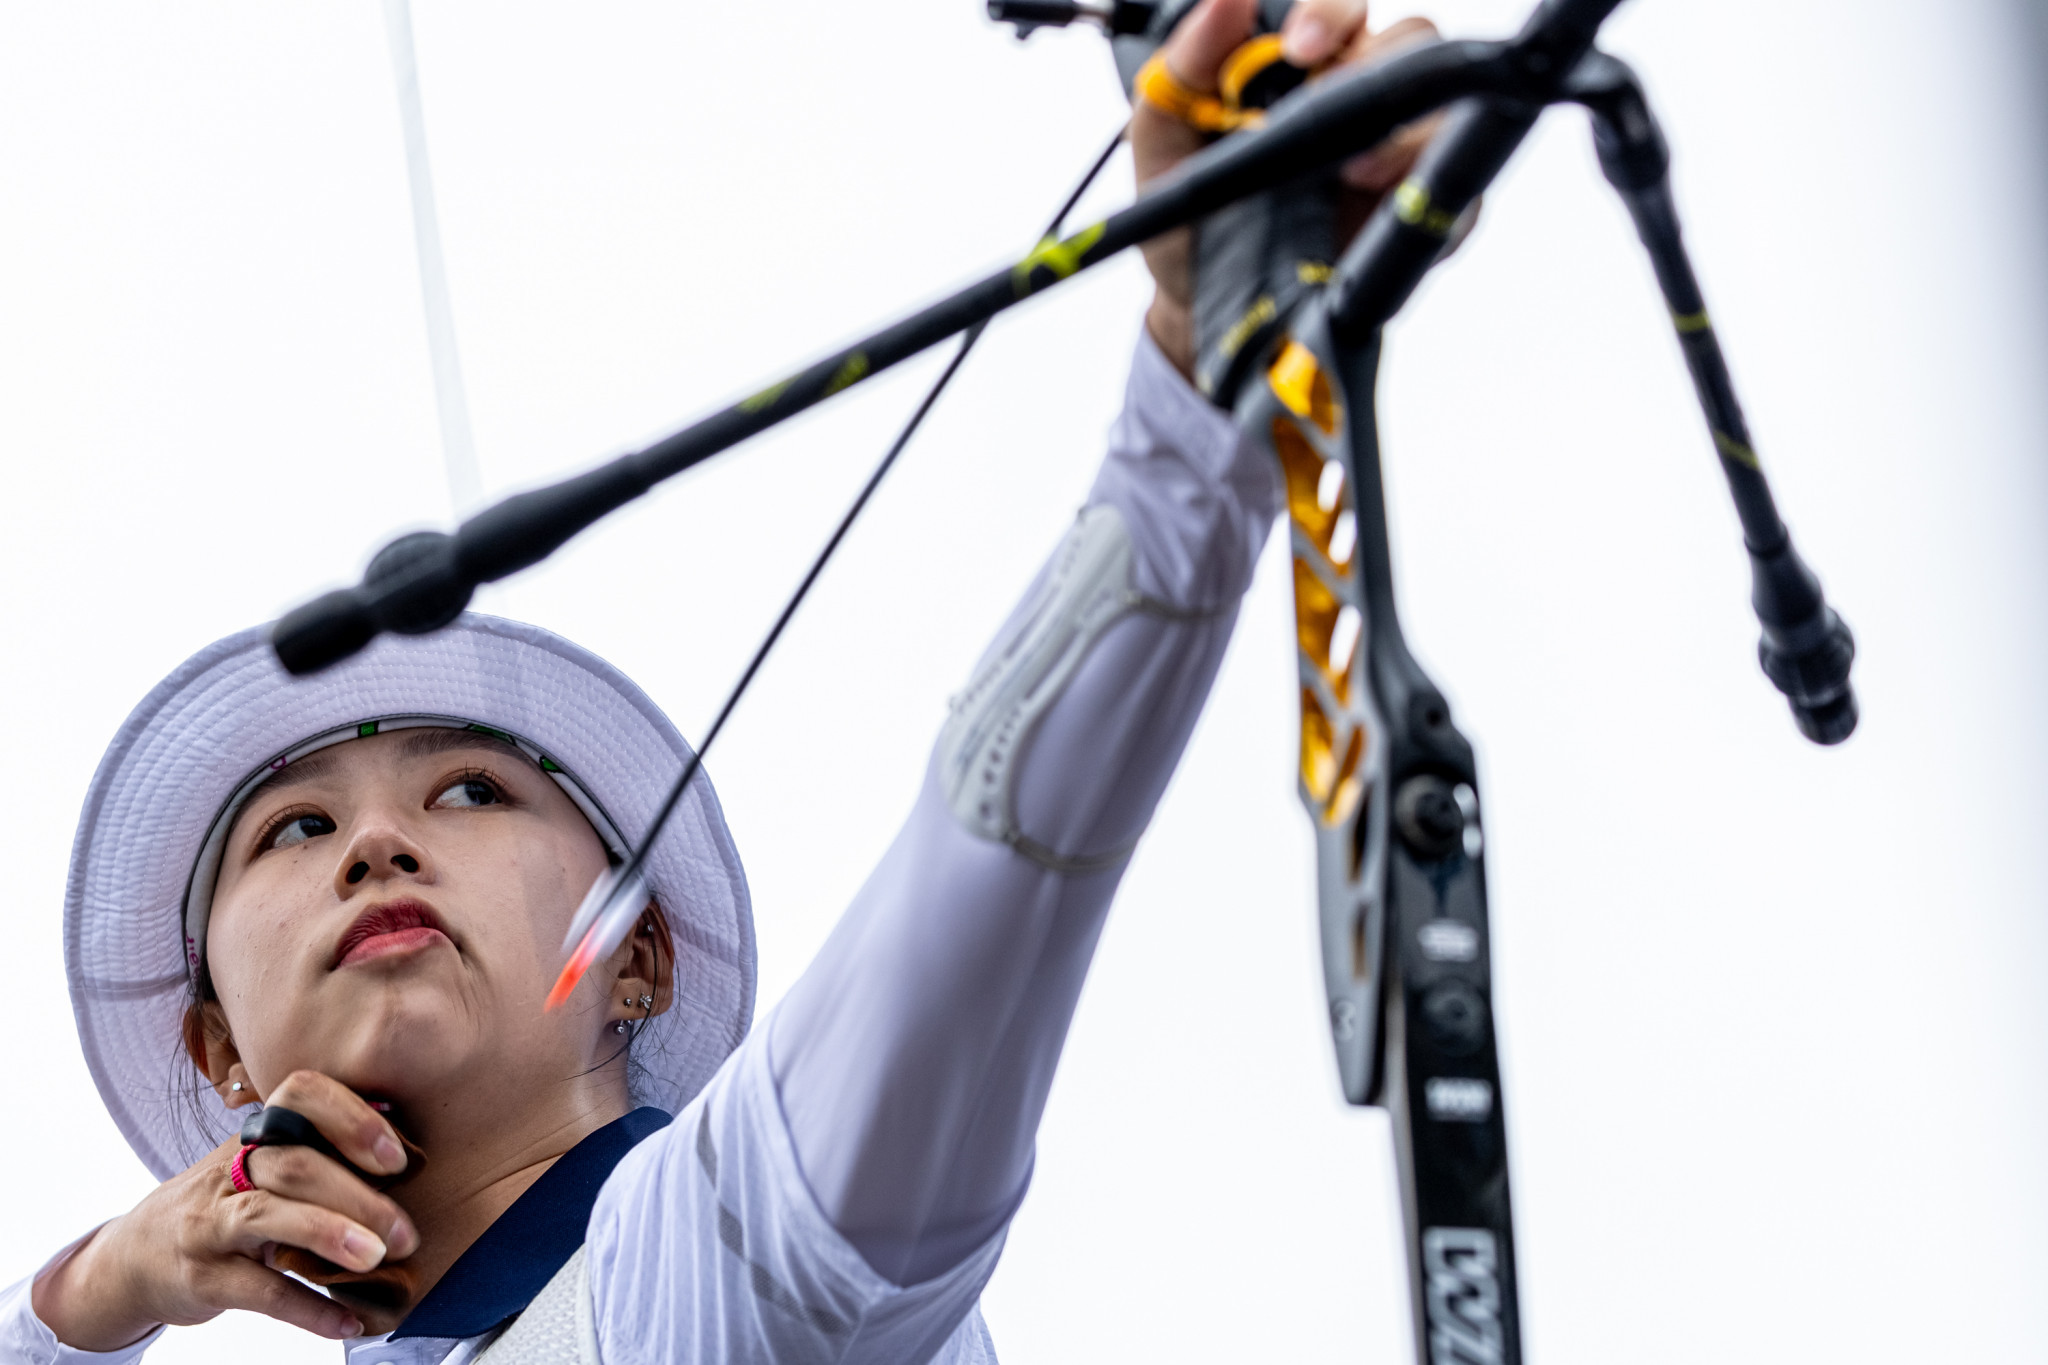 Stage winners Healey and Lim suffer early exits at Archery World Cup Paris 2024 test event